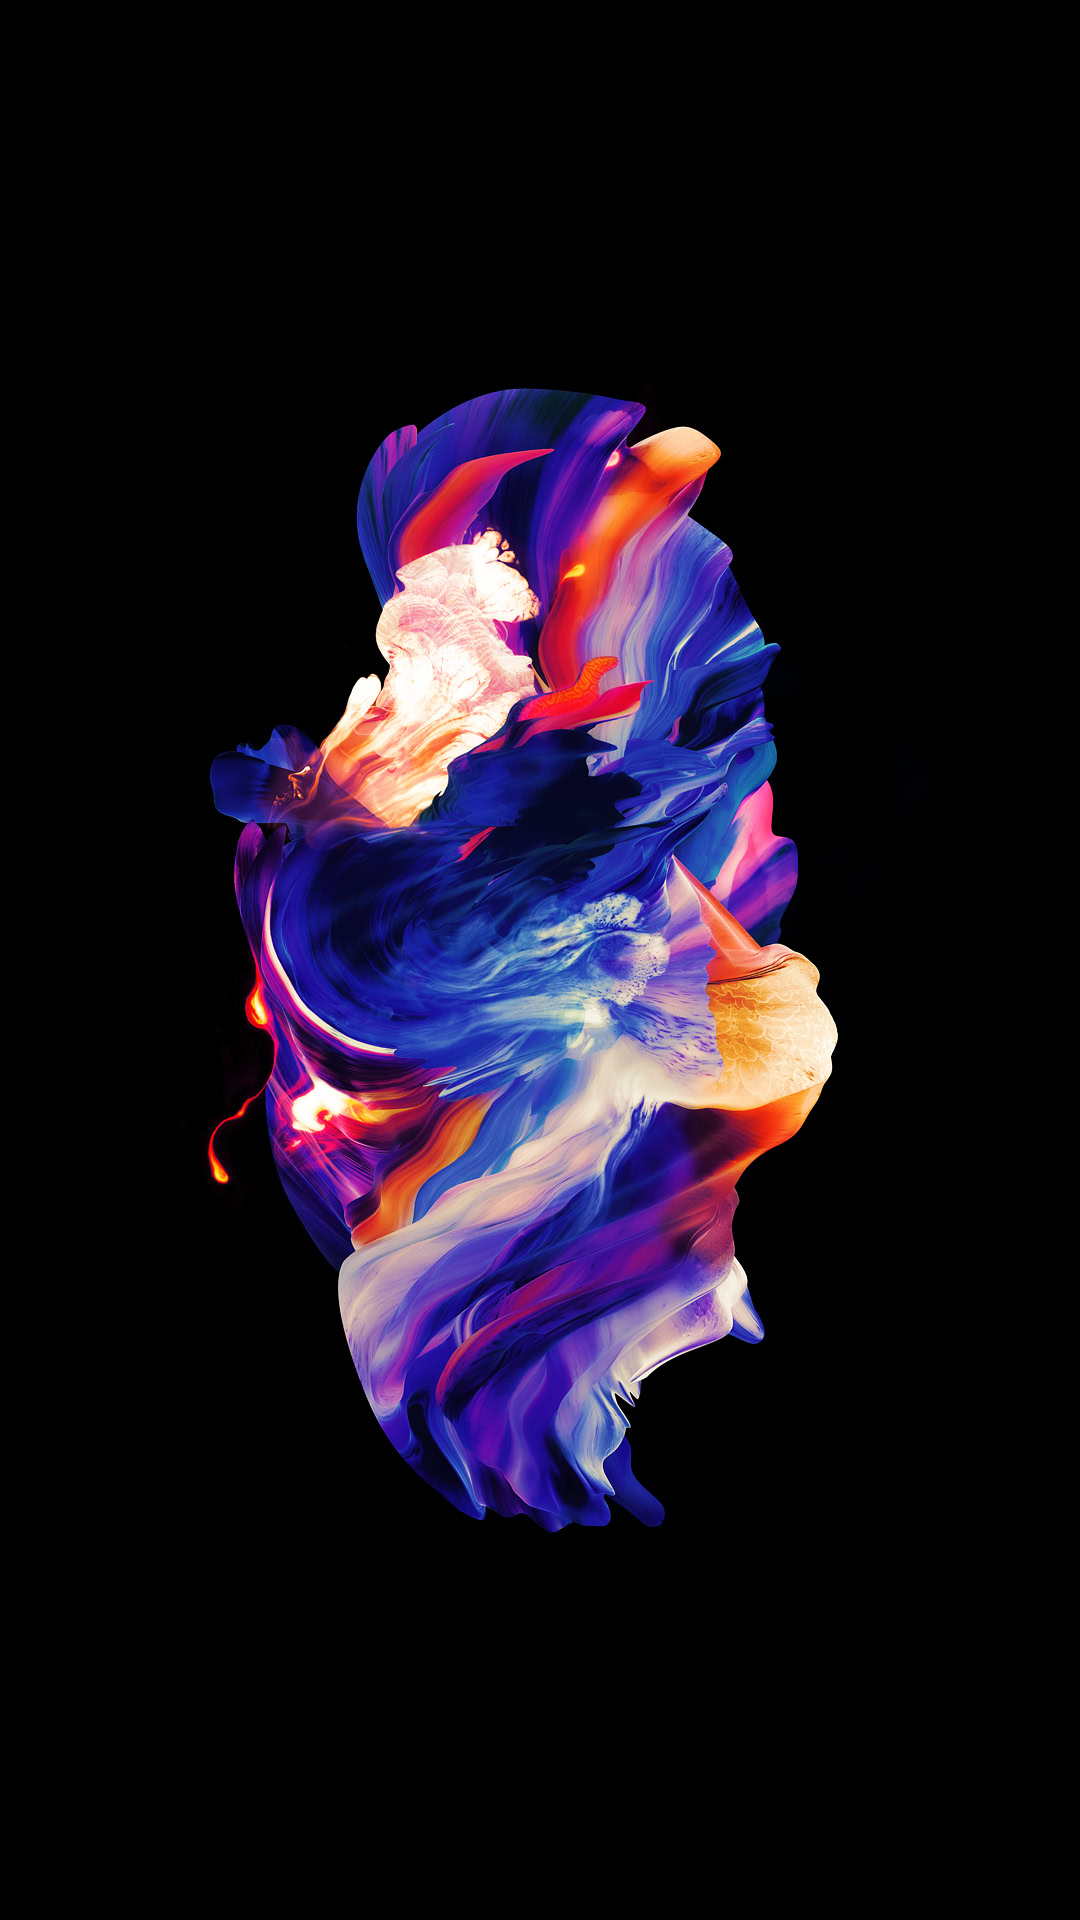 Download all the OnePlus 5 wallpapers in 4K - Android ...